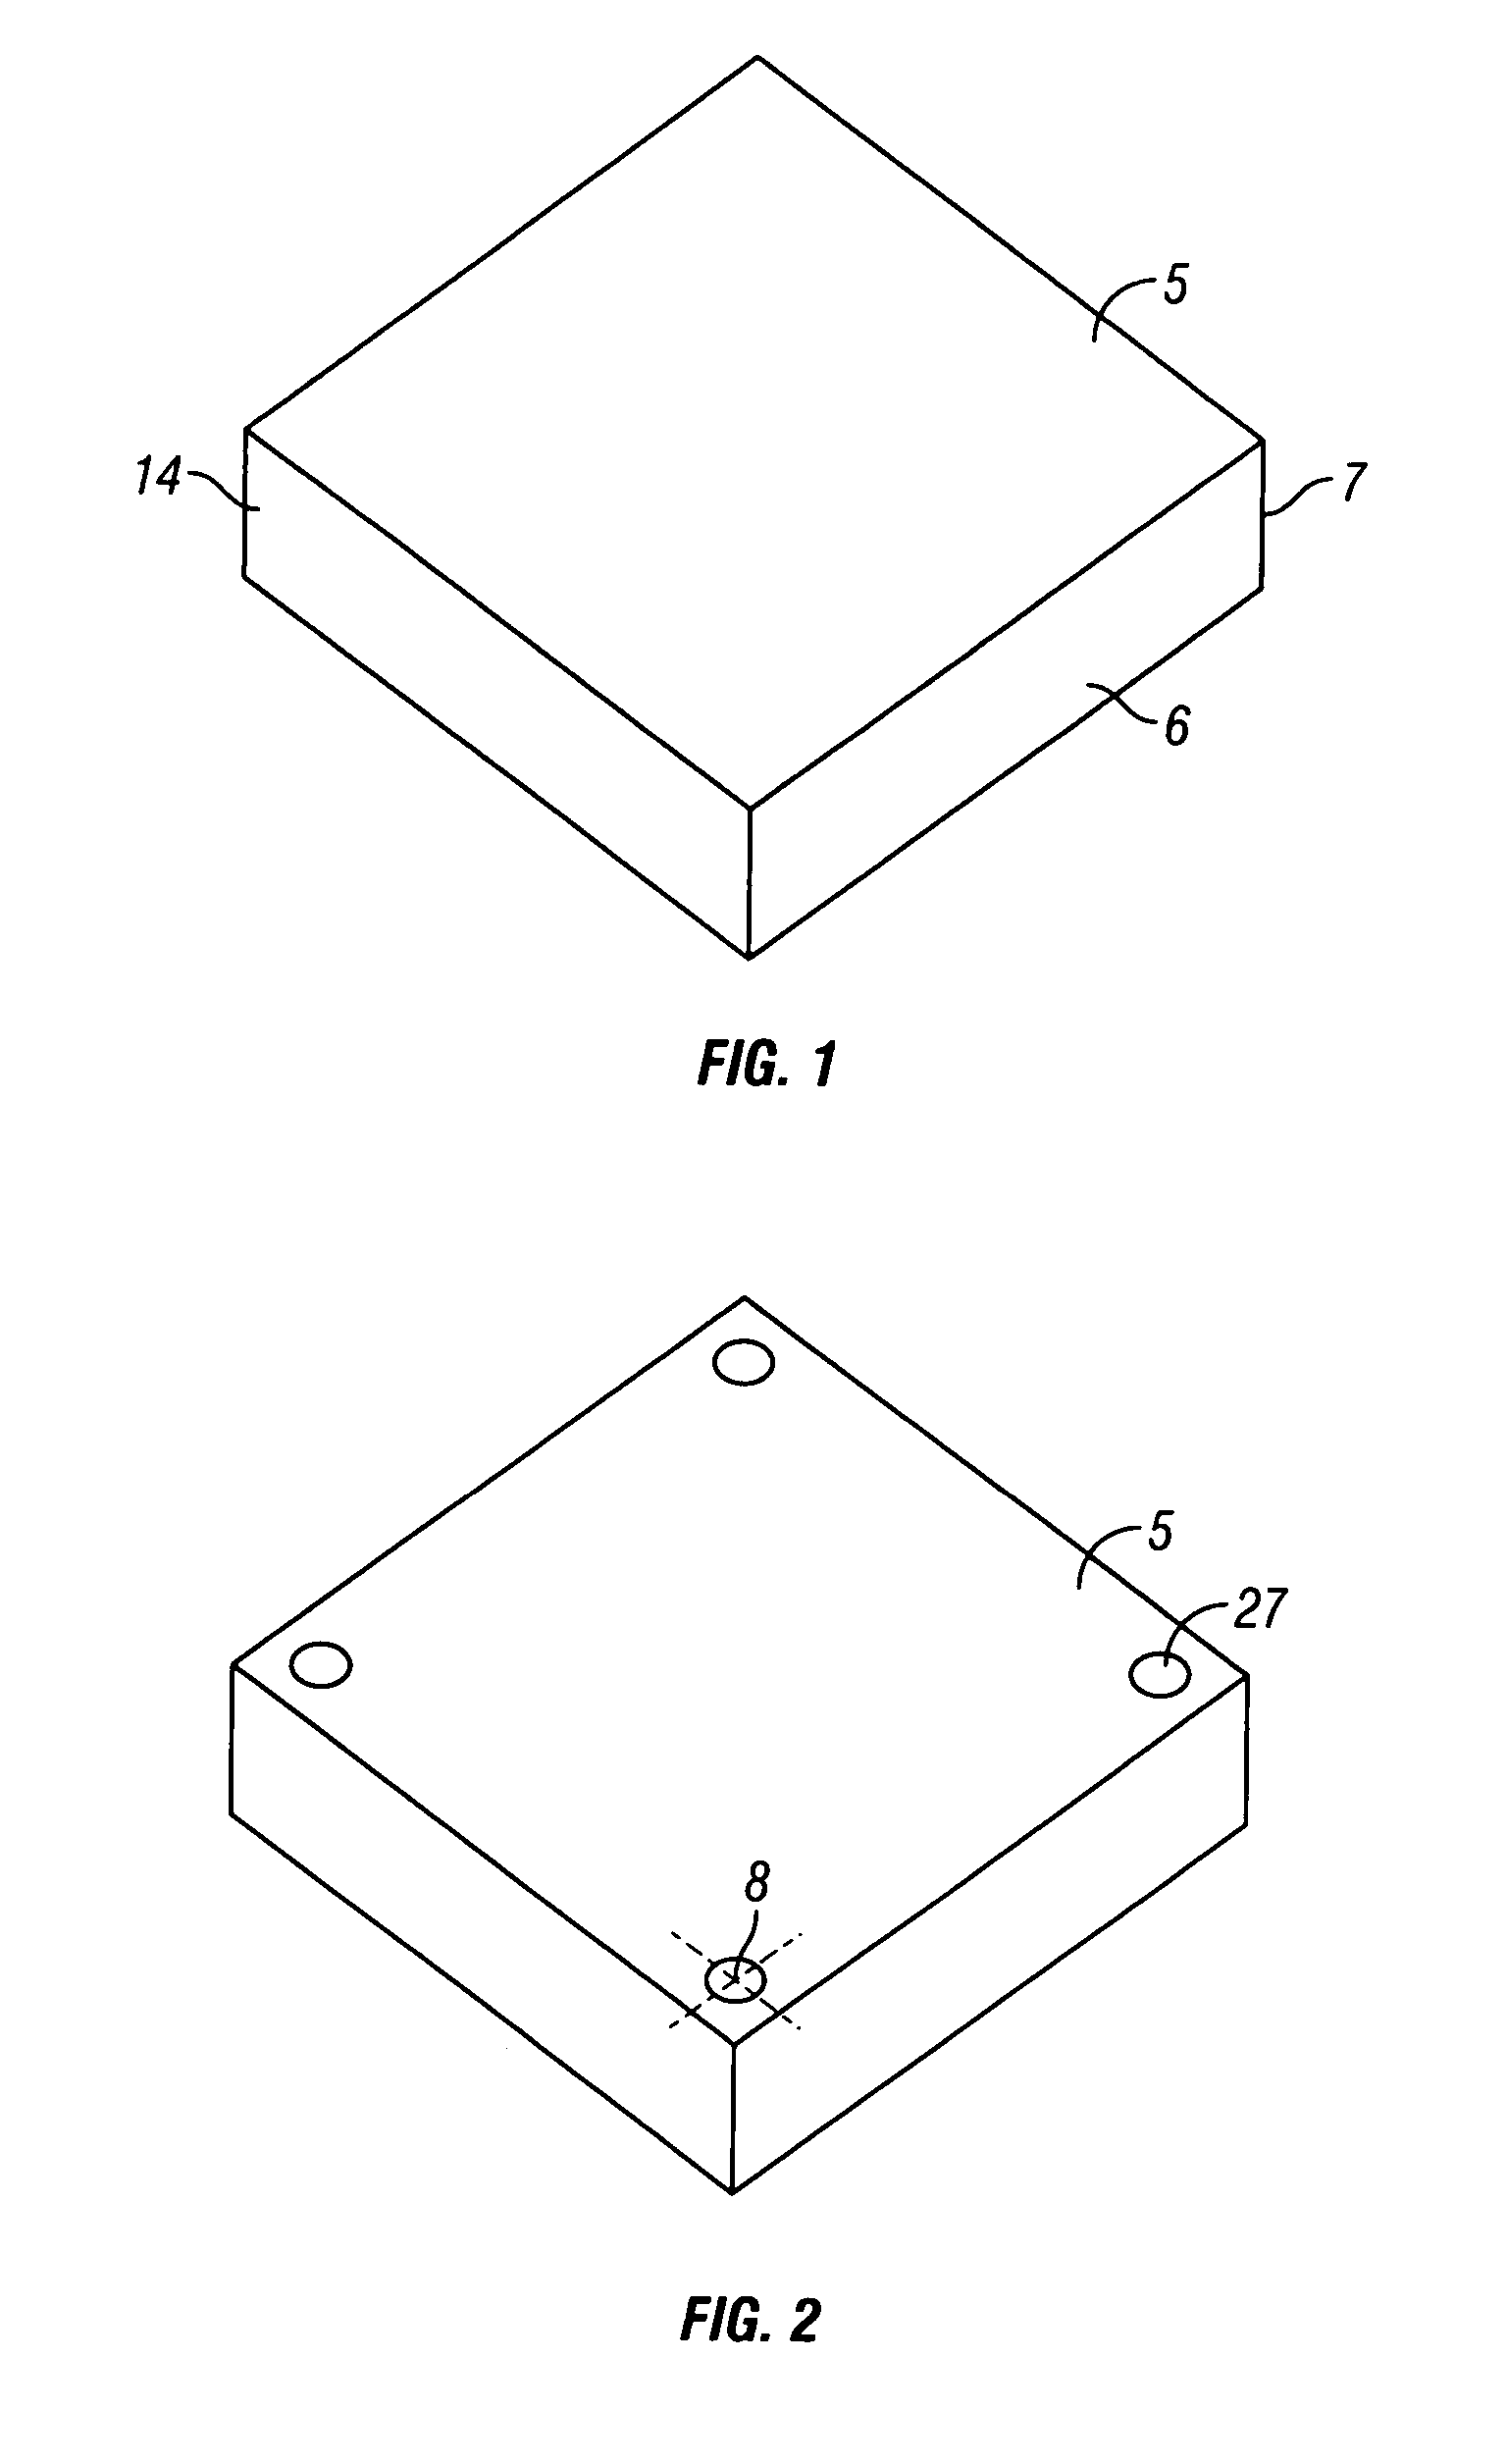 Throttle body spacer for use with internal combustion engines